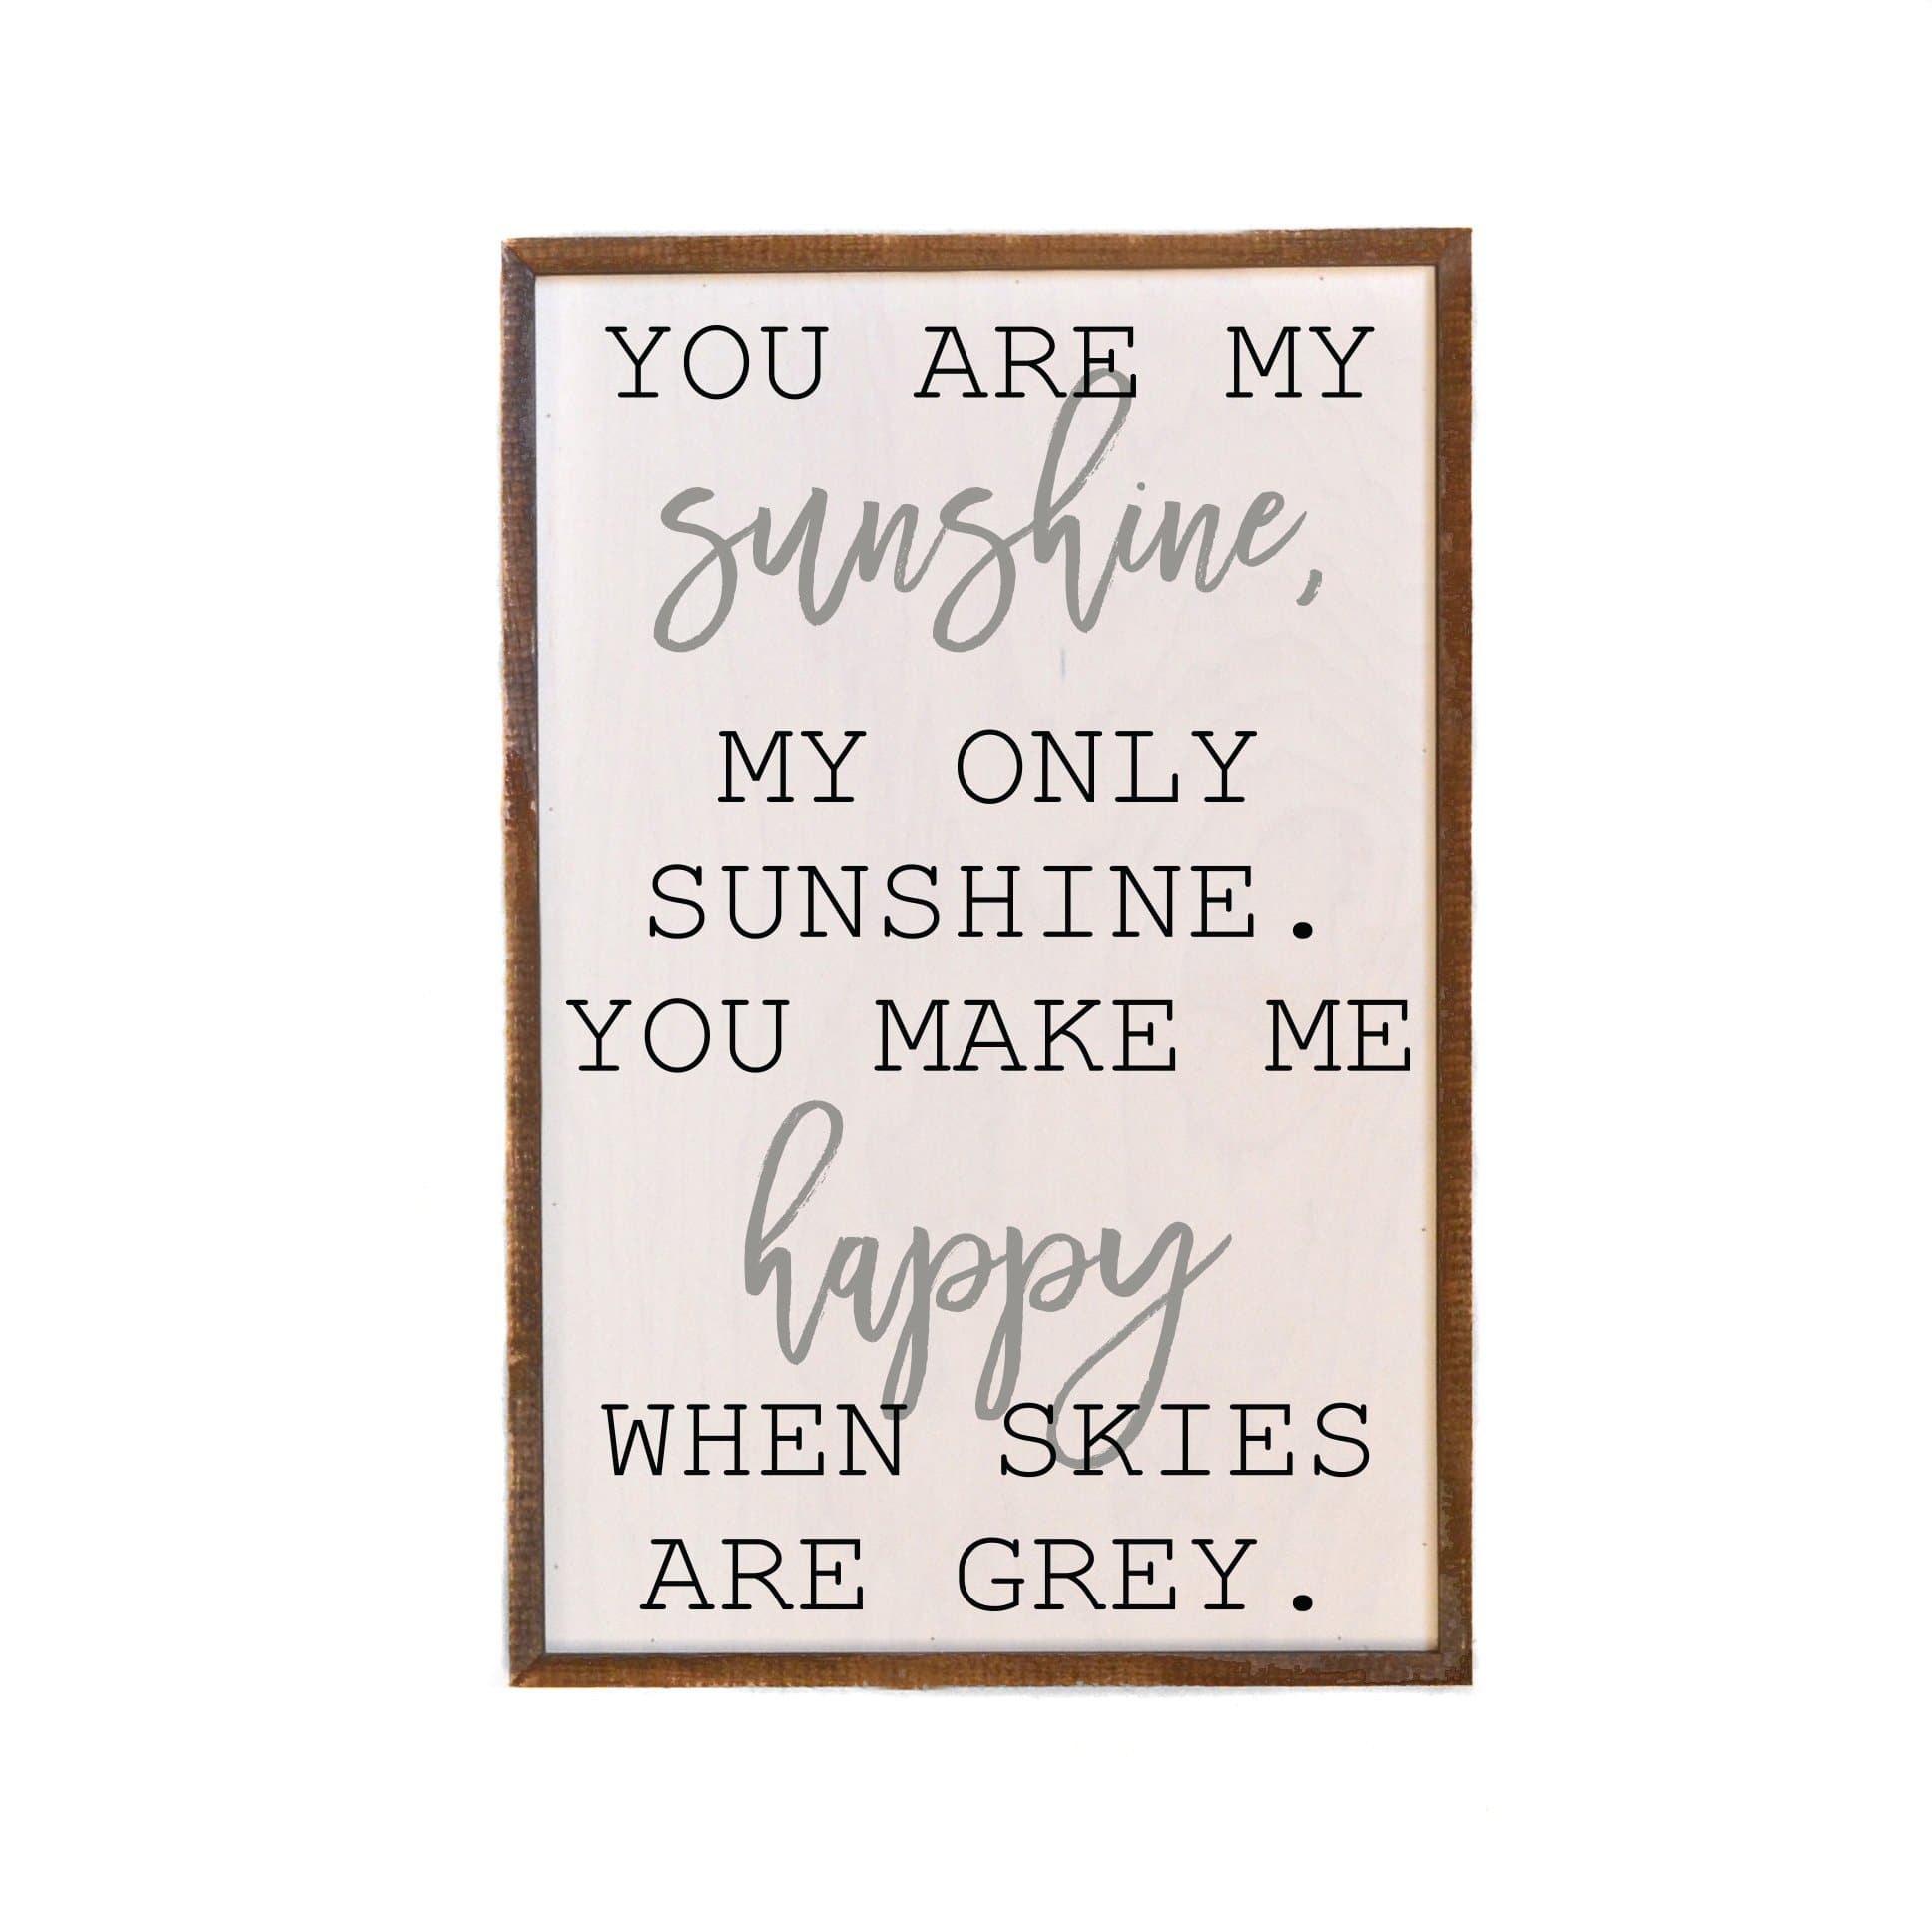 You And Me Wood Sign w/Wire Picture Holder - AW010 - Driftless Studios